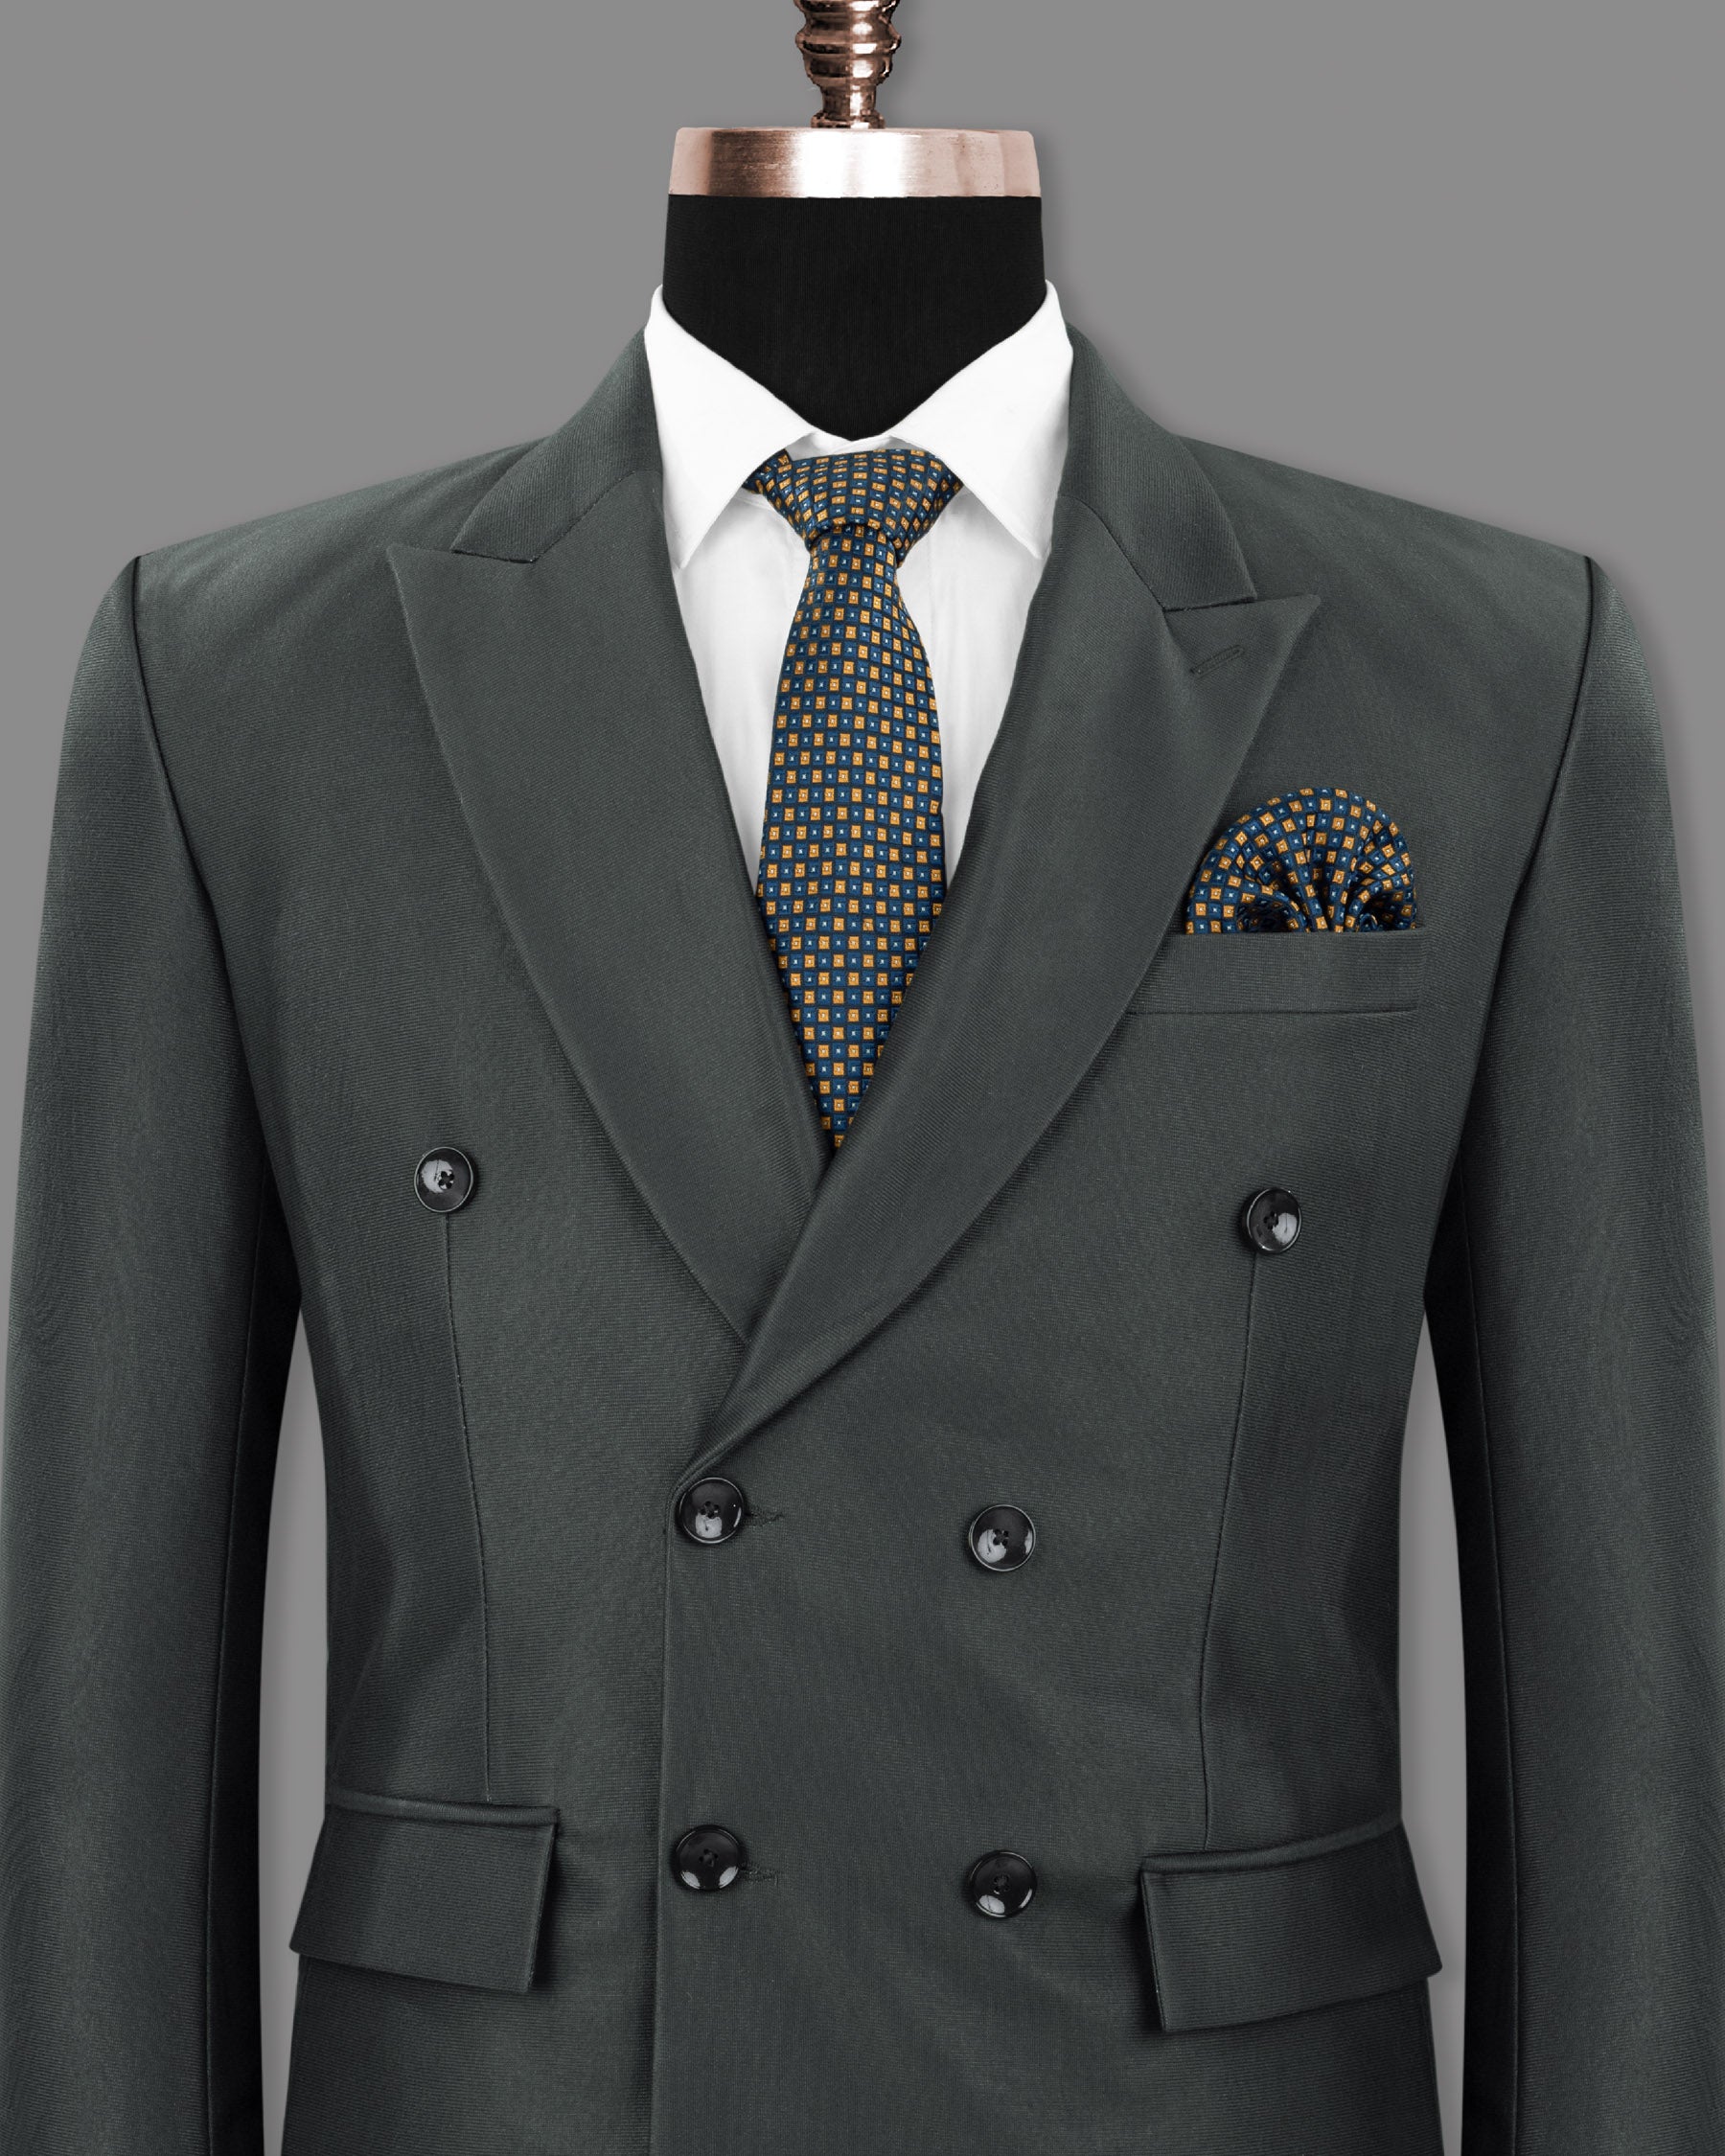 Greyish Green Premium Cotton Double Breasted Blazer BL1214-DB-42, BL1214-DB-52, BL1214-DB-54, BL1214-DB-58, BL1214-DB-56, BL1214-DB-60, BL1214-DB-36, BL1214-DB-38, BL1214-DB-44, BL1214-DB-46, BL1214-DB-50, BL1214-DB-40, BL1214-DB-48